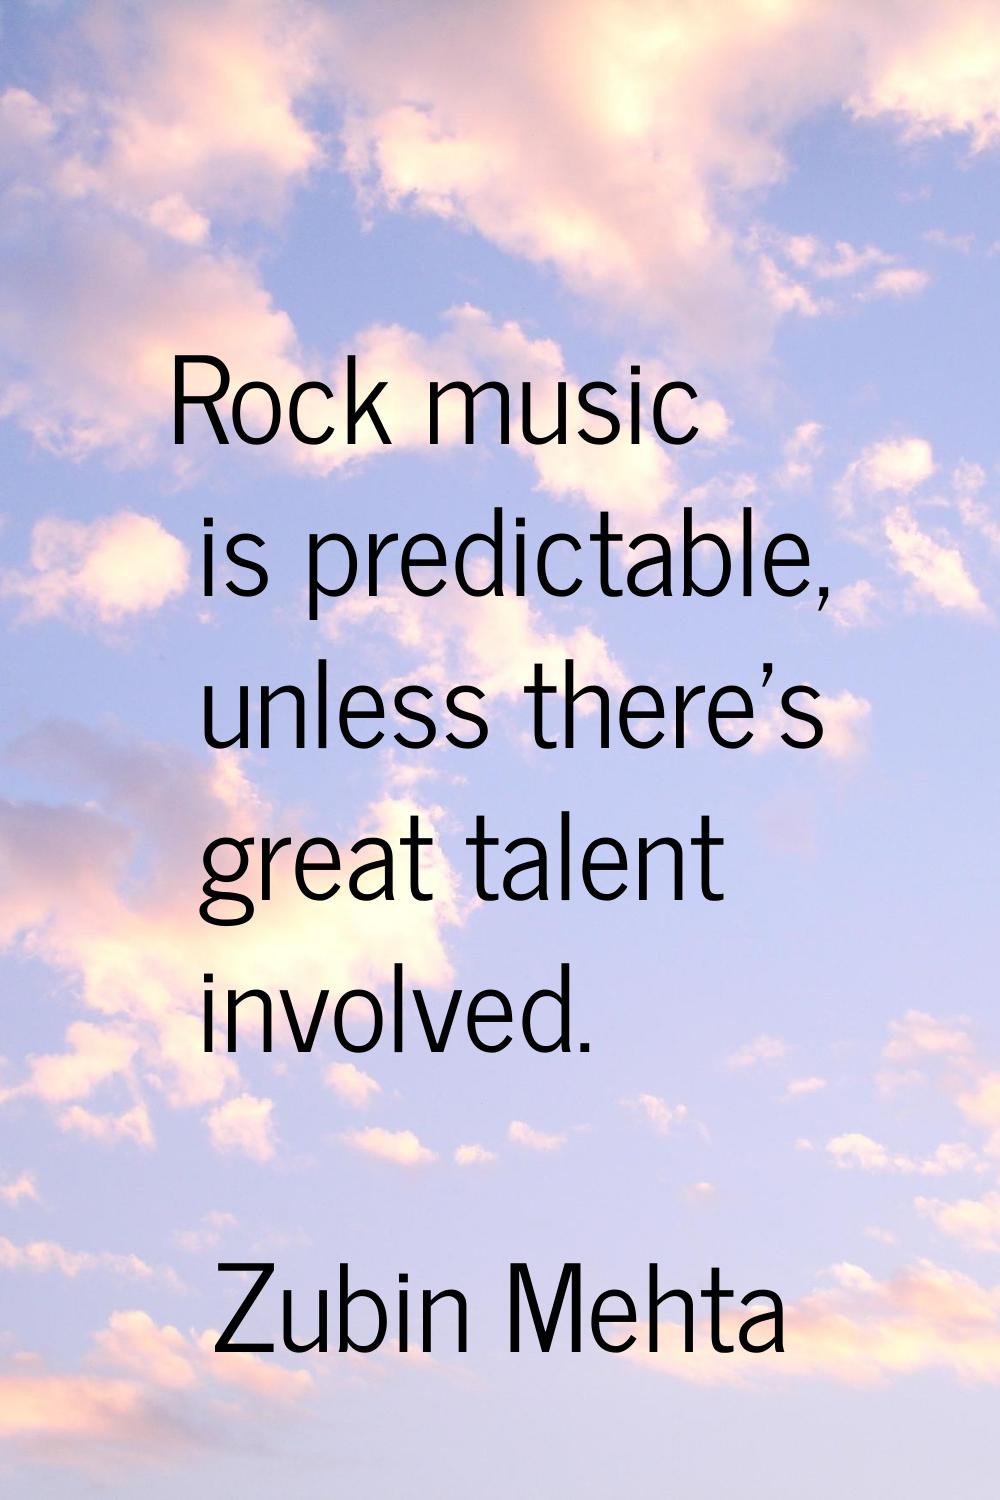 Rock music is predictable, unless there's great talent involved.